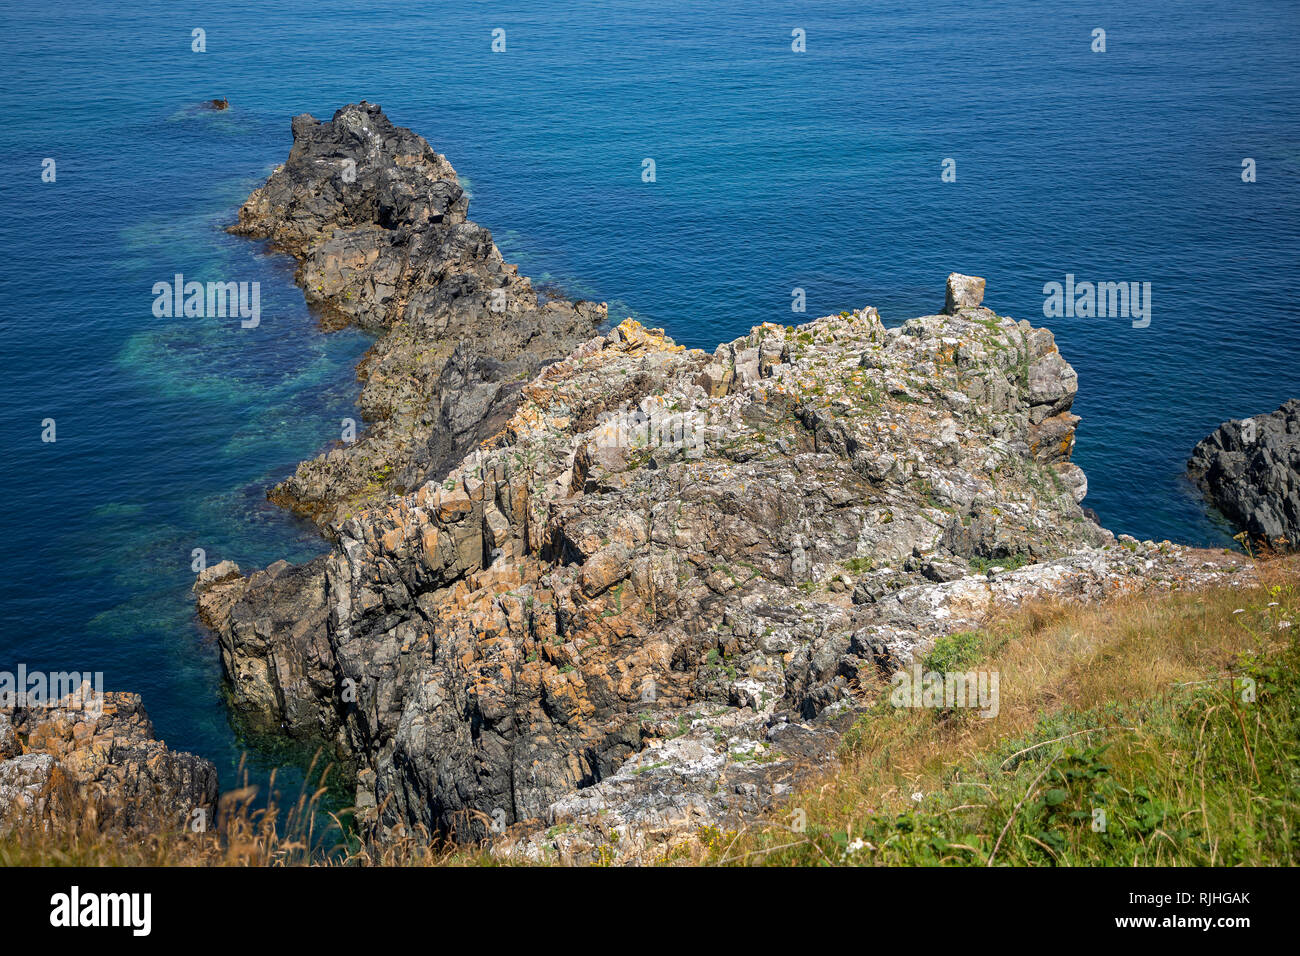 Rock outcrop showing clarity of the sea on the Alderney coast near Roselle Point. Stock Photo